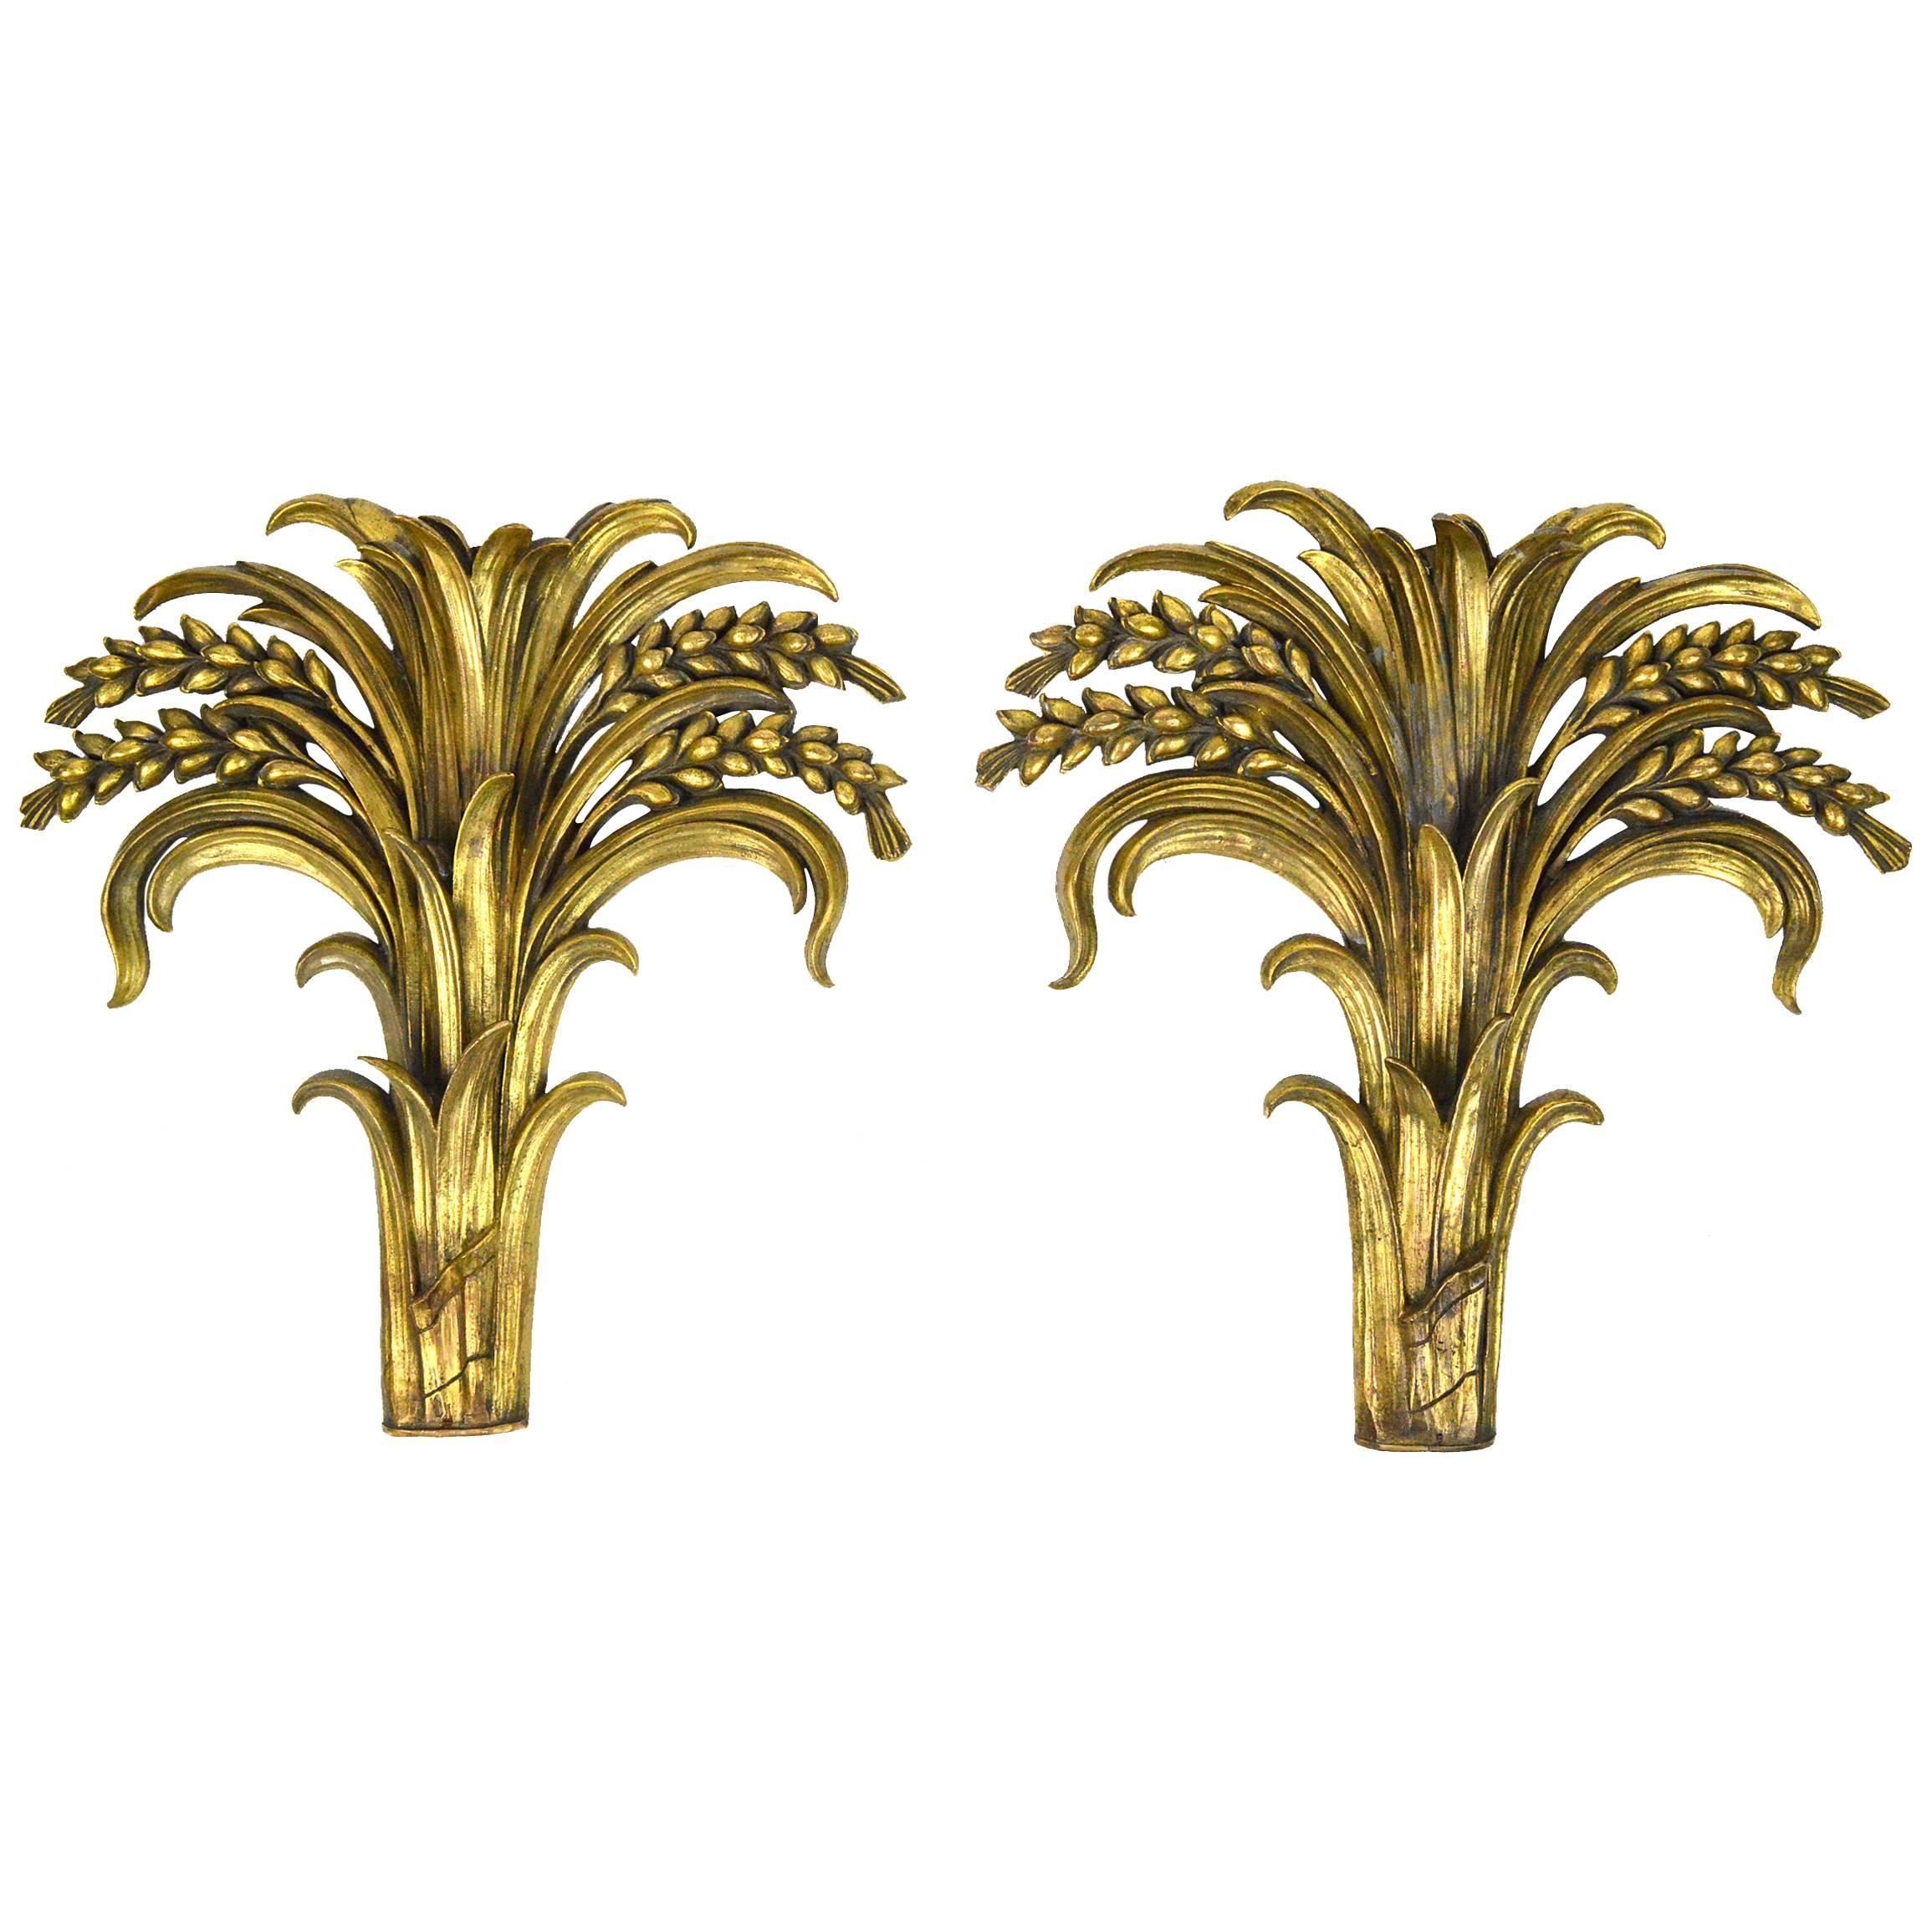 Pair of French Deco Gilt Bronze Architectural Elements For Sale